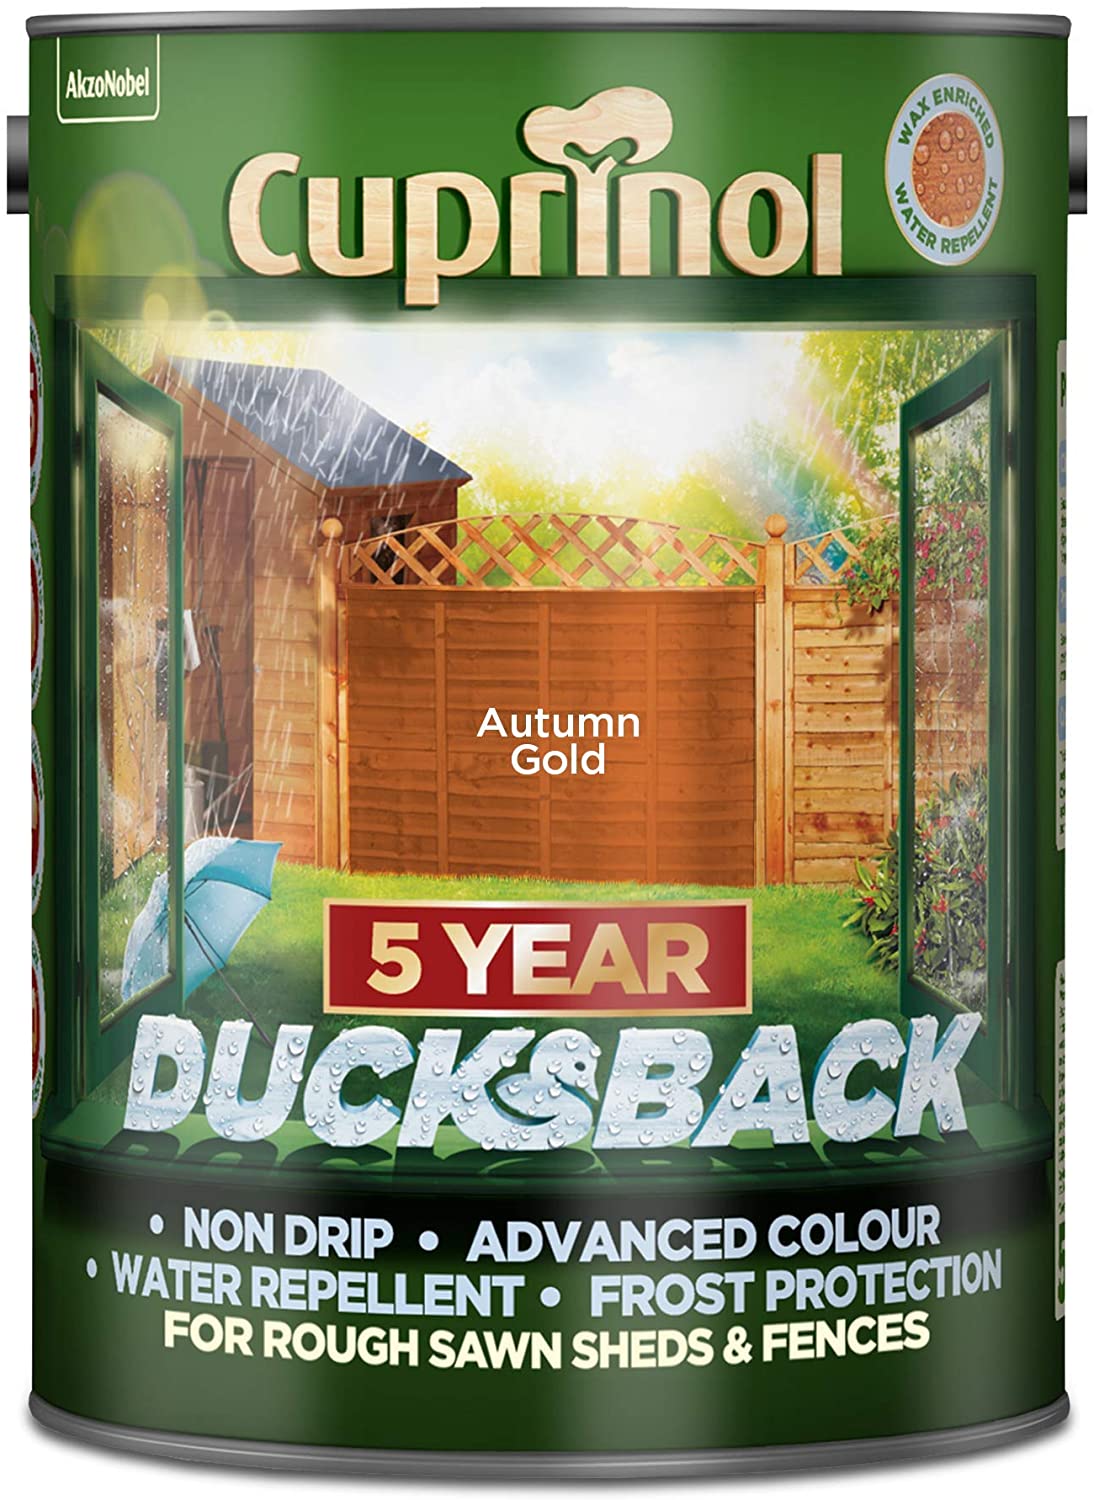 Cuprinol Ducksback 5 Year Waterproof For Sheds And Fences - Autumn Gold Litre Garden & Diy Home